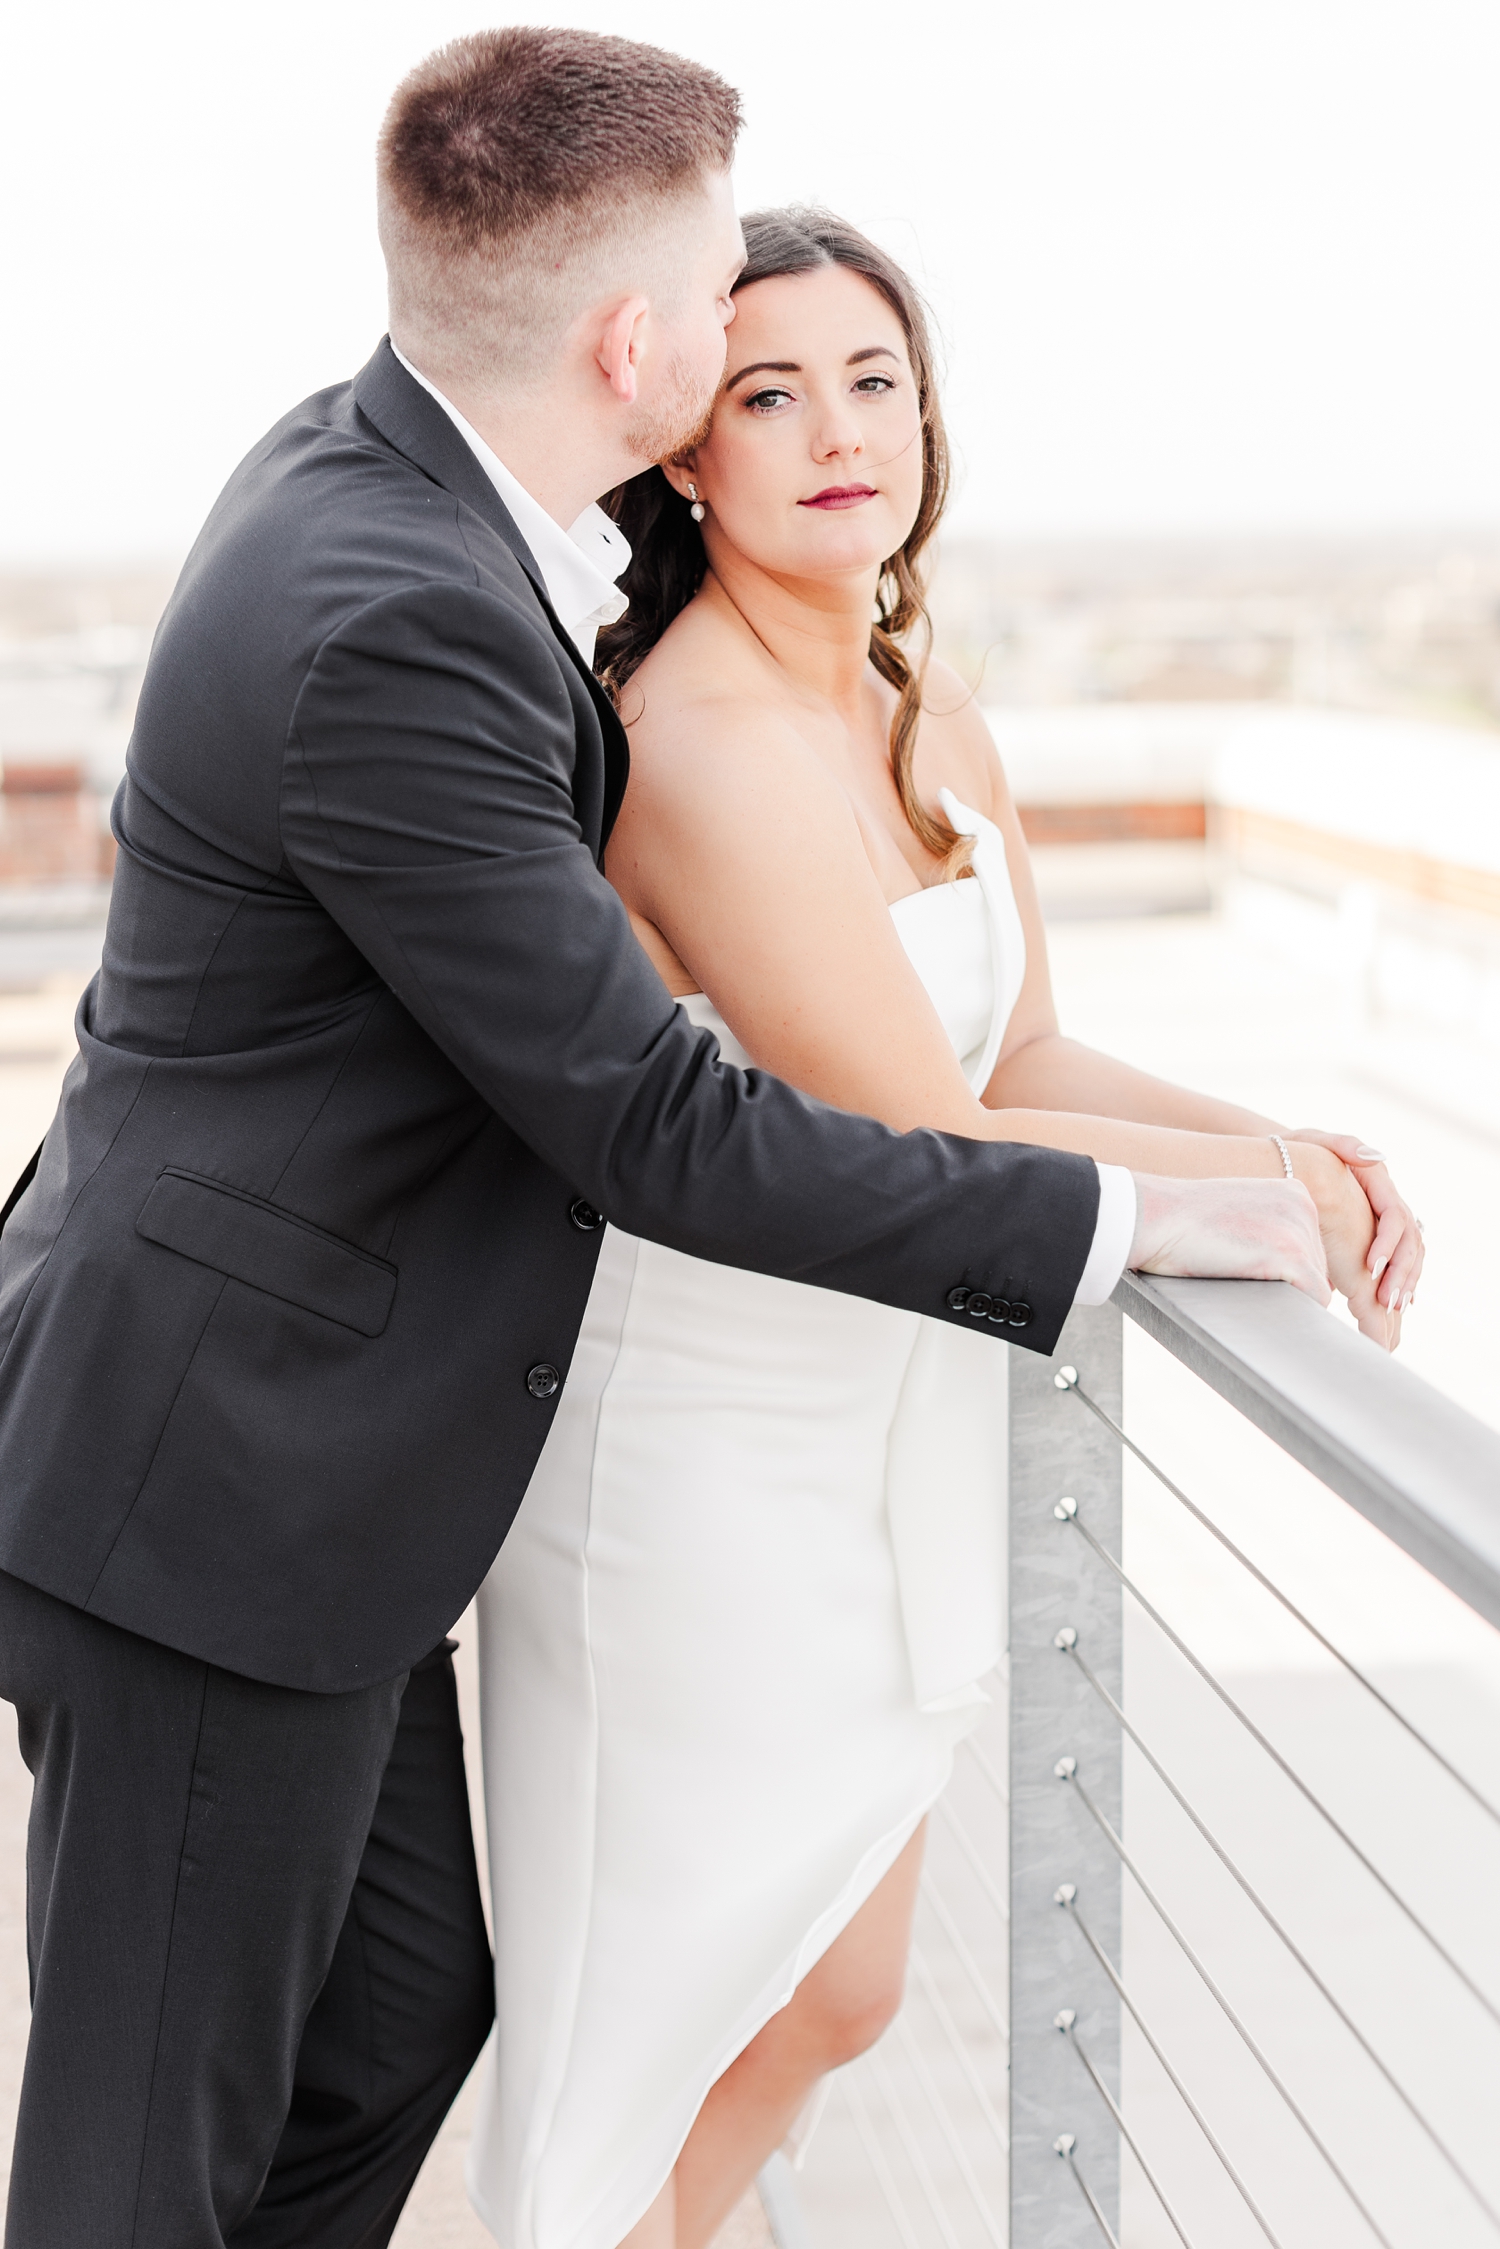 Jenna and her fiance, Dustin, lean over a metal railing on the rooftop of the The Equitable Building in Des Moines, IA | CB Studio